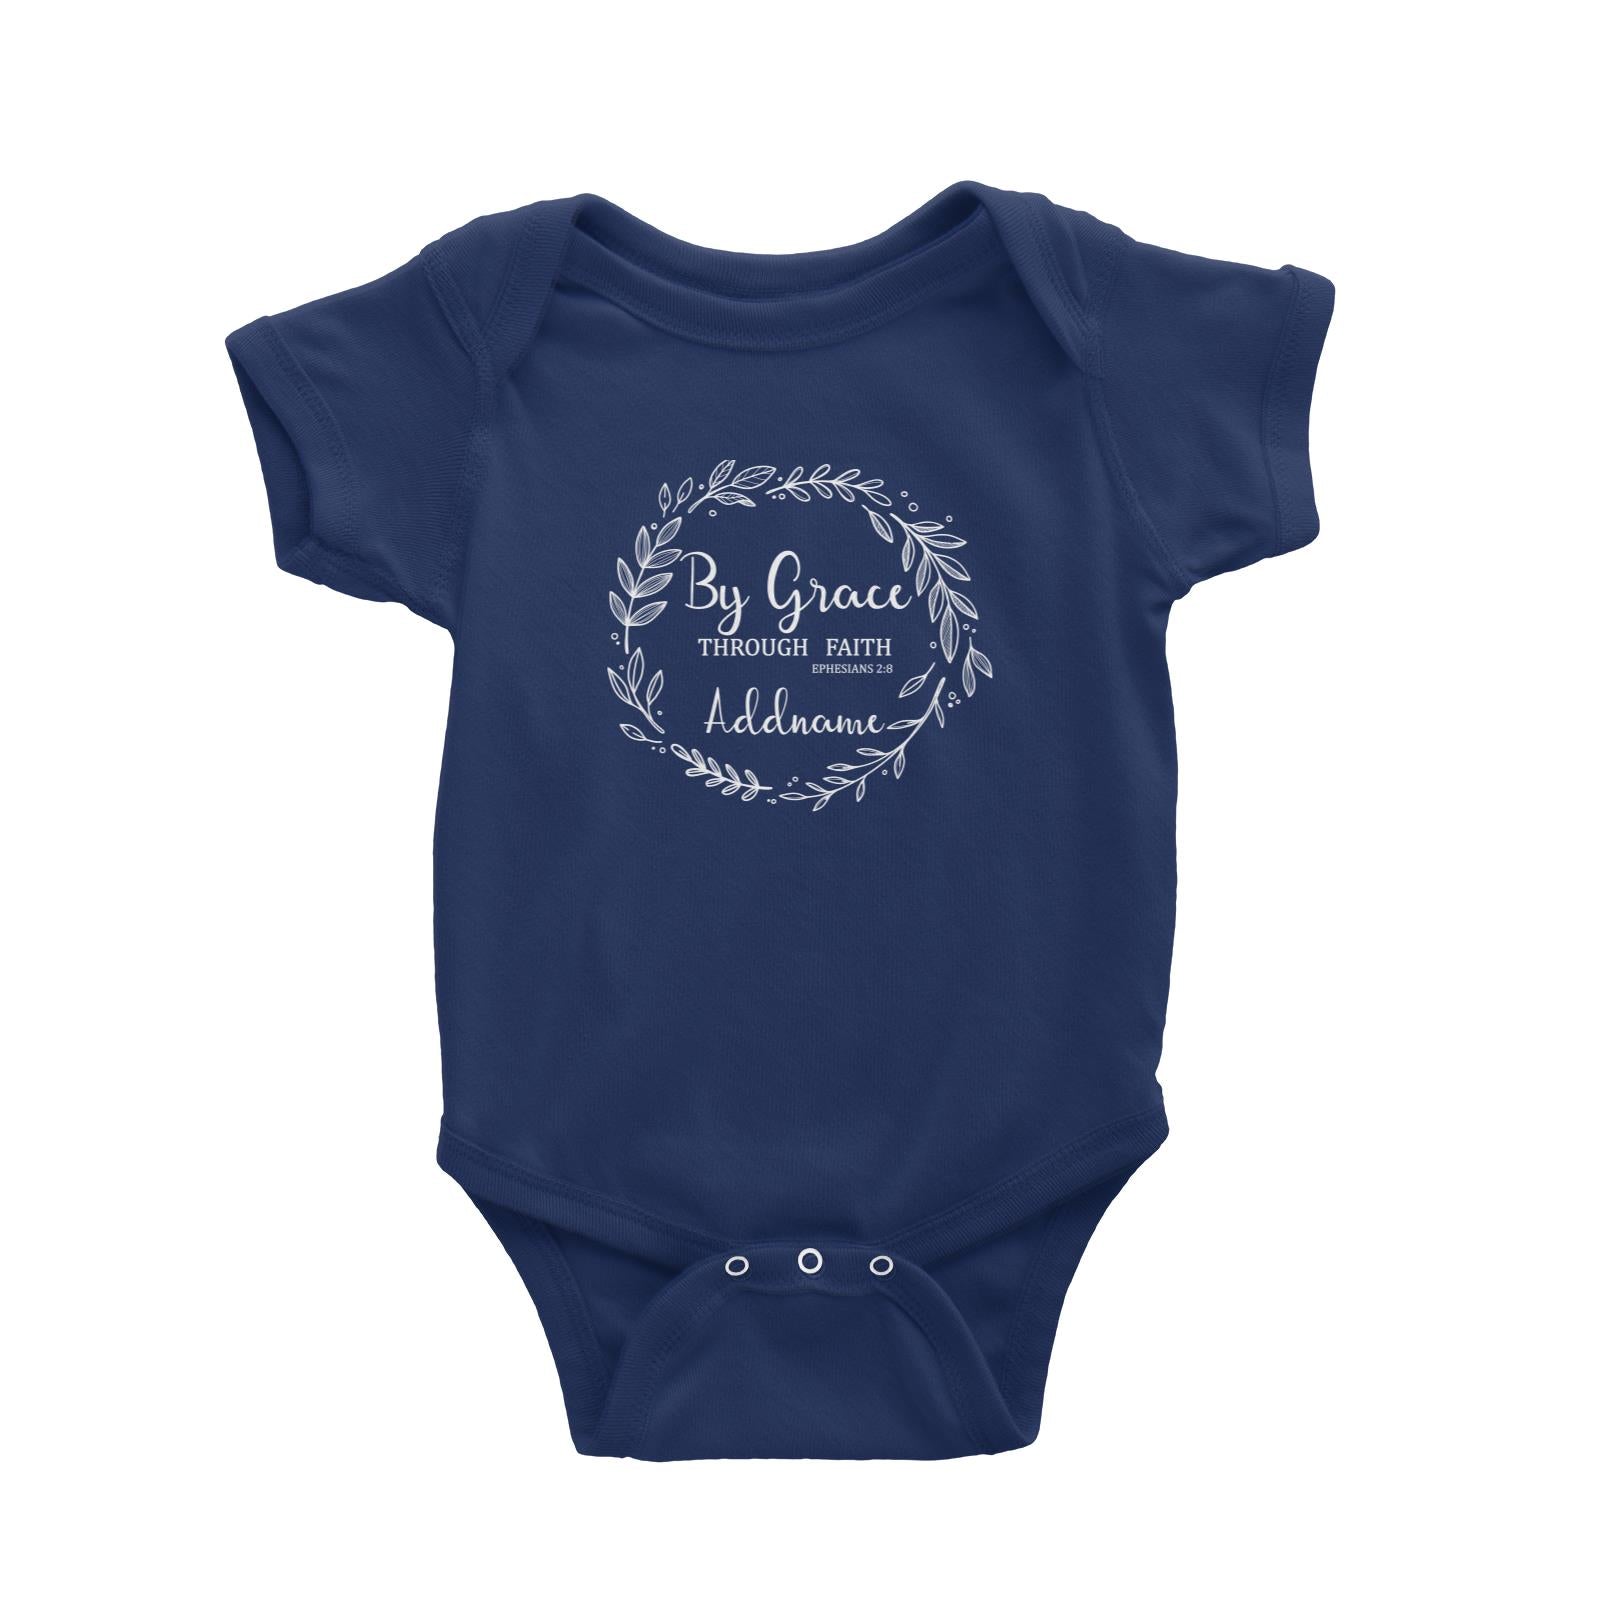 Christian Series By Grace Through Faith Ephesians 2.8 Addname Baby Romper